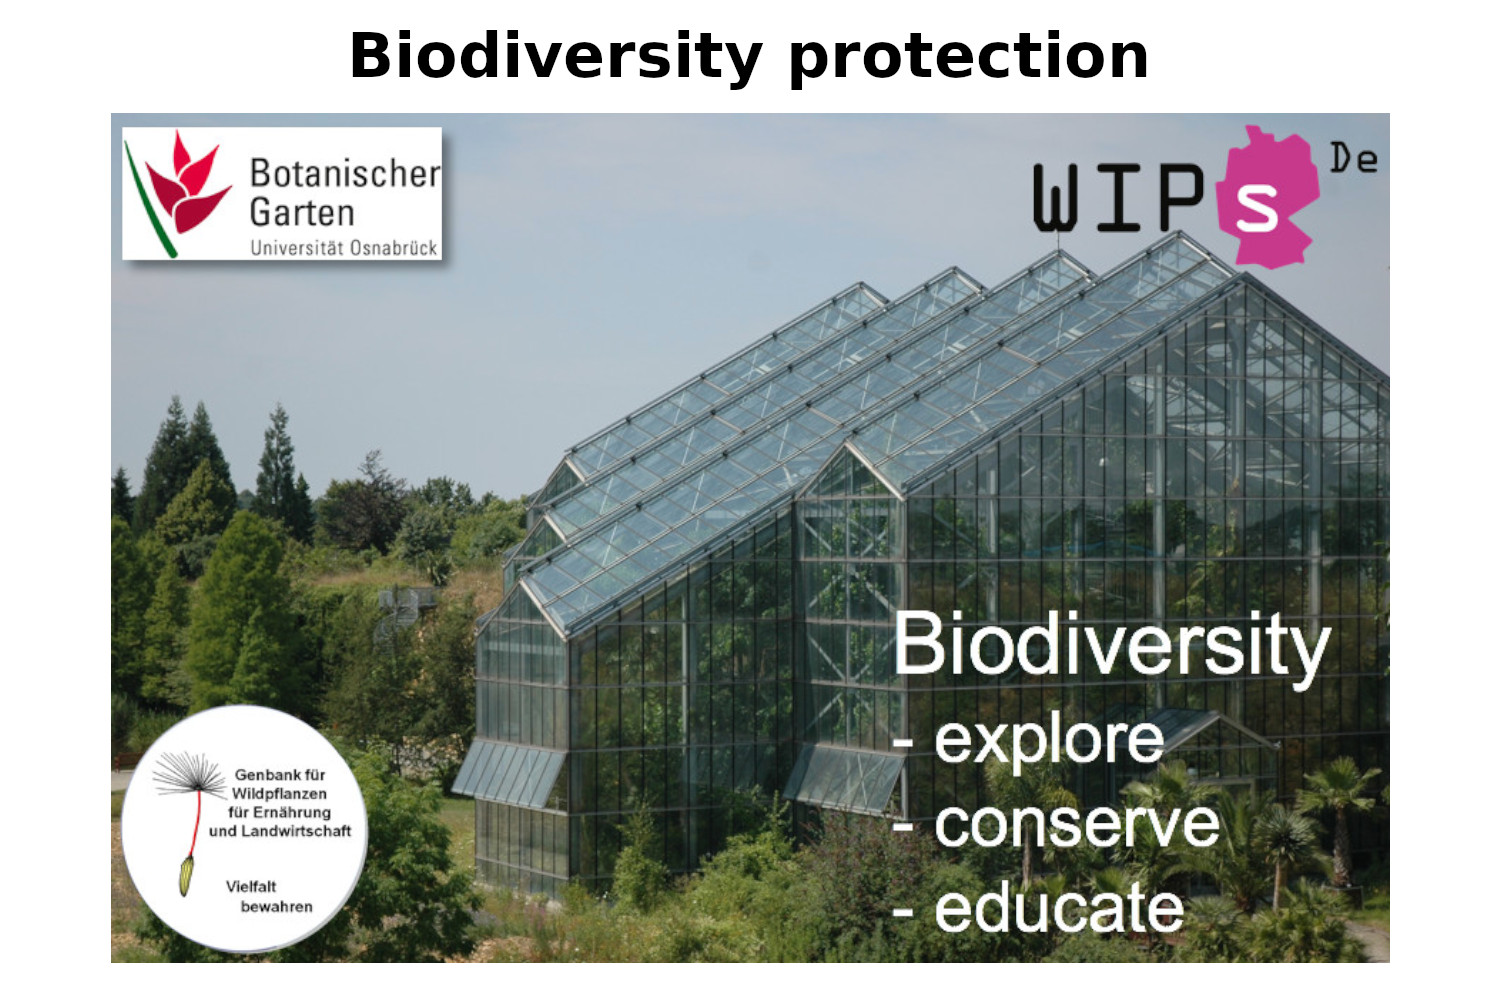 The Botanical Garden of the University of Osnabrueck has initiated two national biodiversity protection networks. The German crop wild relative gene bank (WEL) is a wild plant 
seed ex situ ressource for breeding and research (https://www.genbank-wel.uni-osnabrueck.de/index.php/en/). The national WIPS.De (Wildpflanzenschutz-Deutschland) project protects 92 wild plant species for which Germany has taken a special responsibility by combining ex situ and in situ approaches (https://www.wildpflanzenschutz.uni-osnabrueck.de).